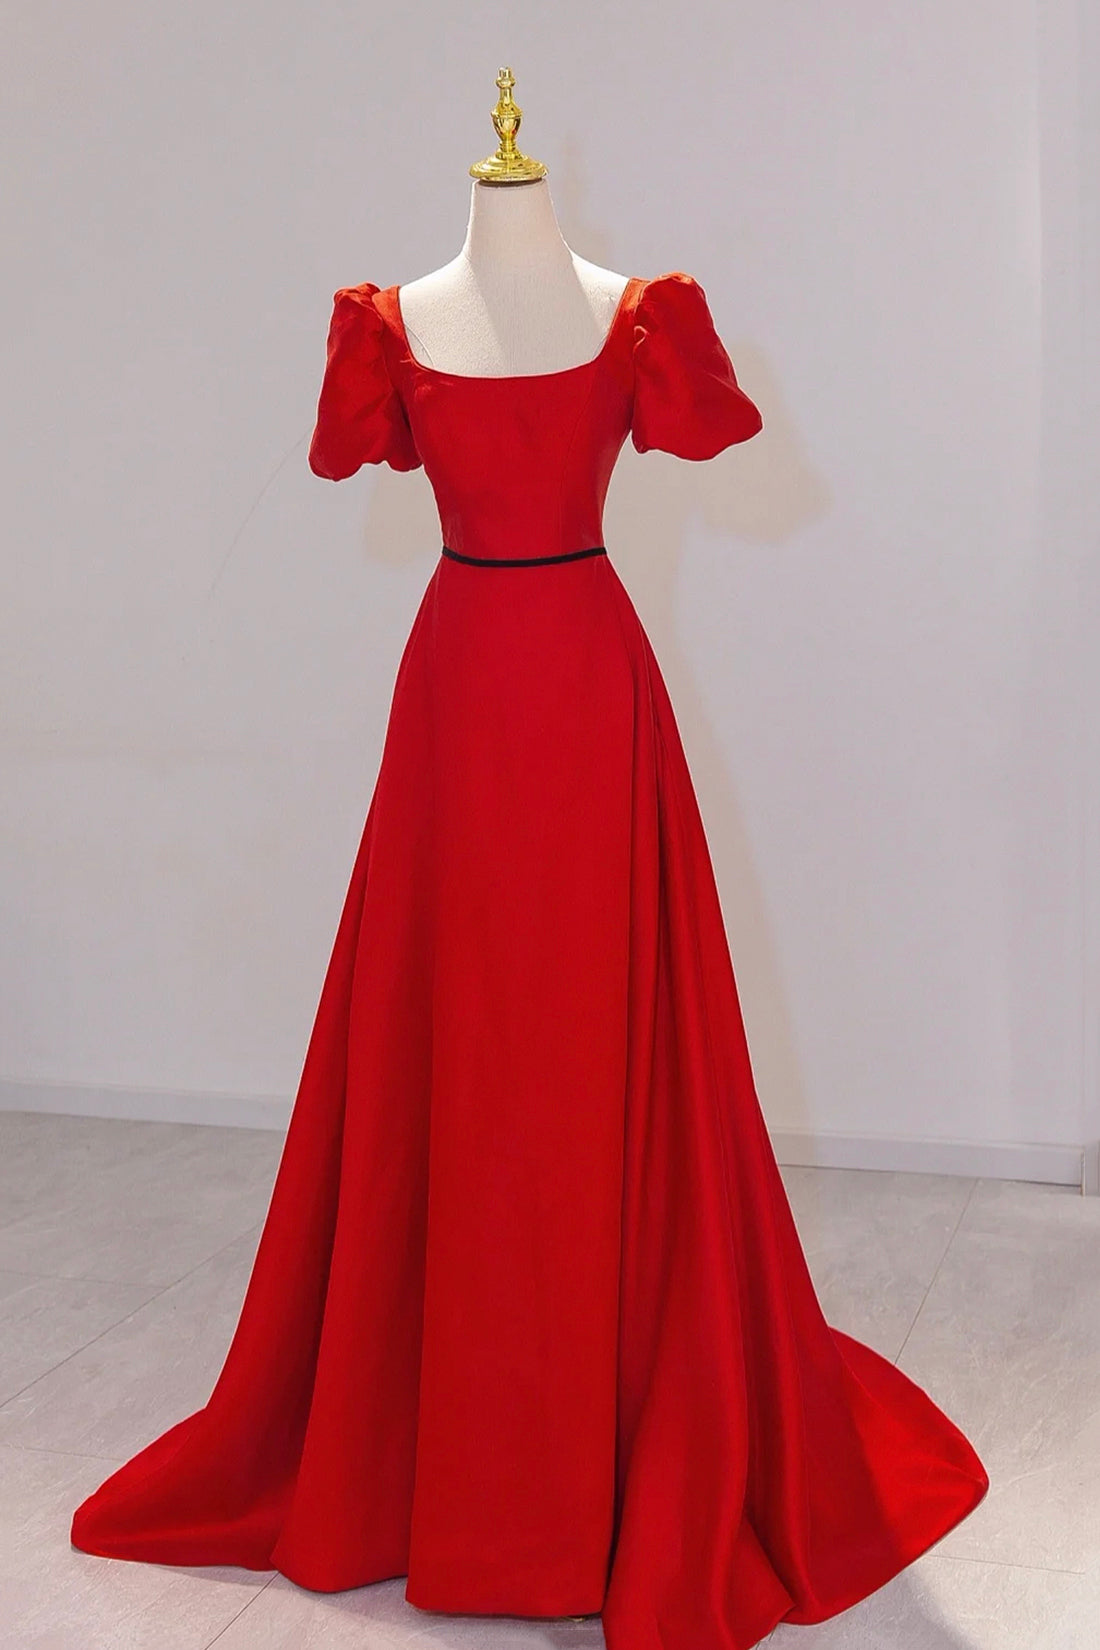 Elegant Satin Long Prom Dress, Simple A-Line Red Evening Party Dress